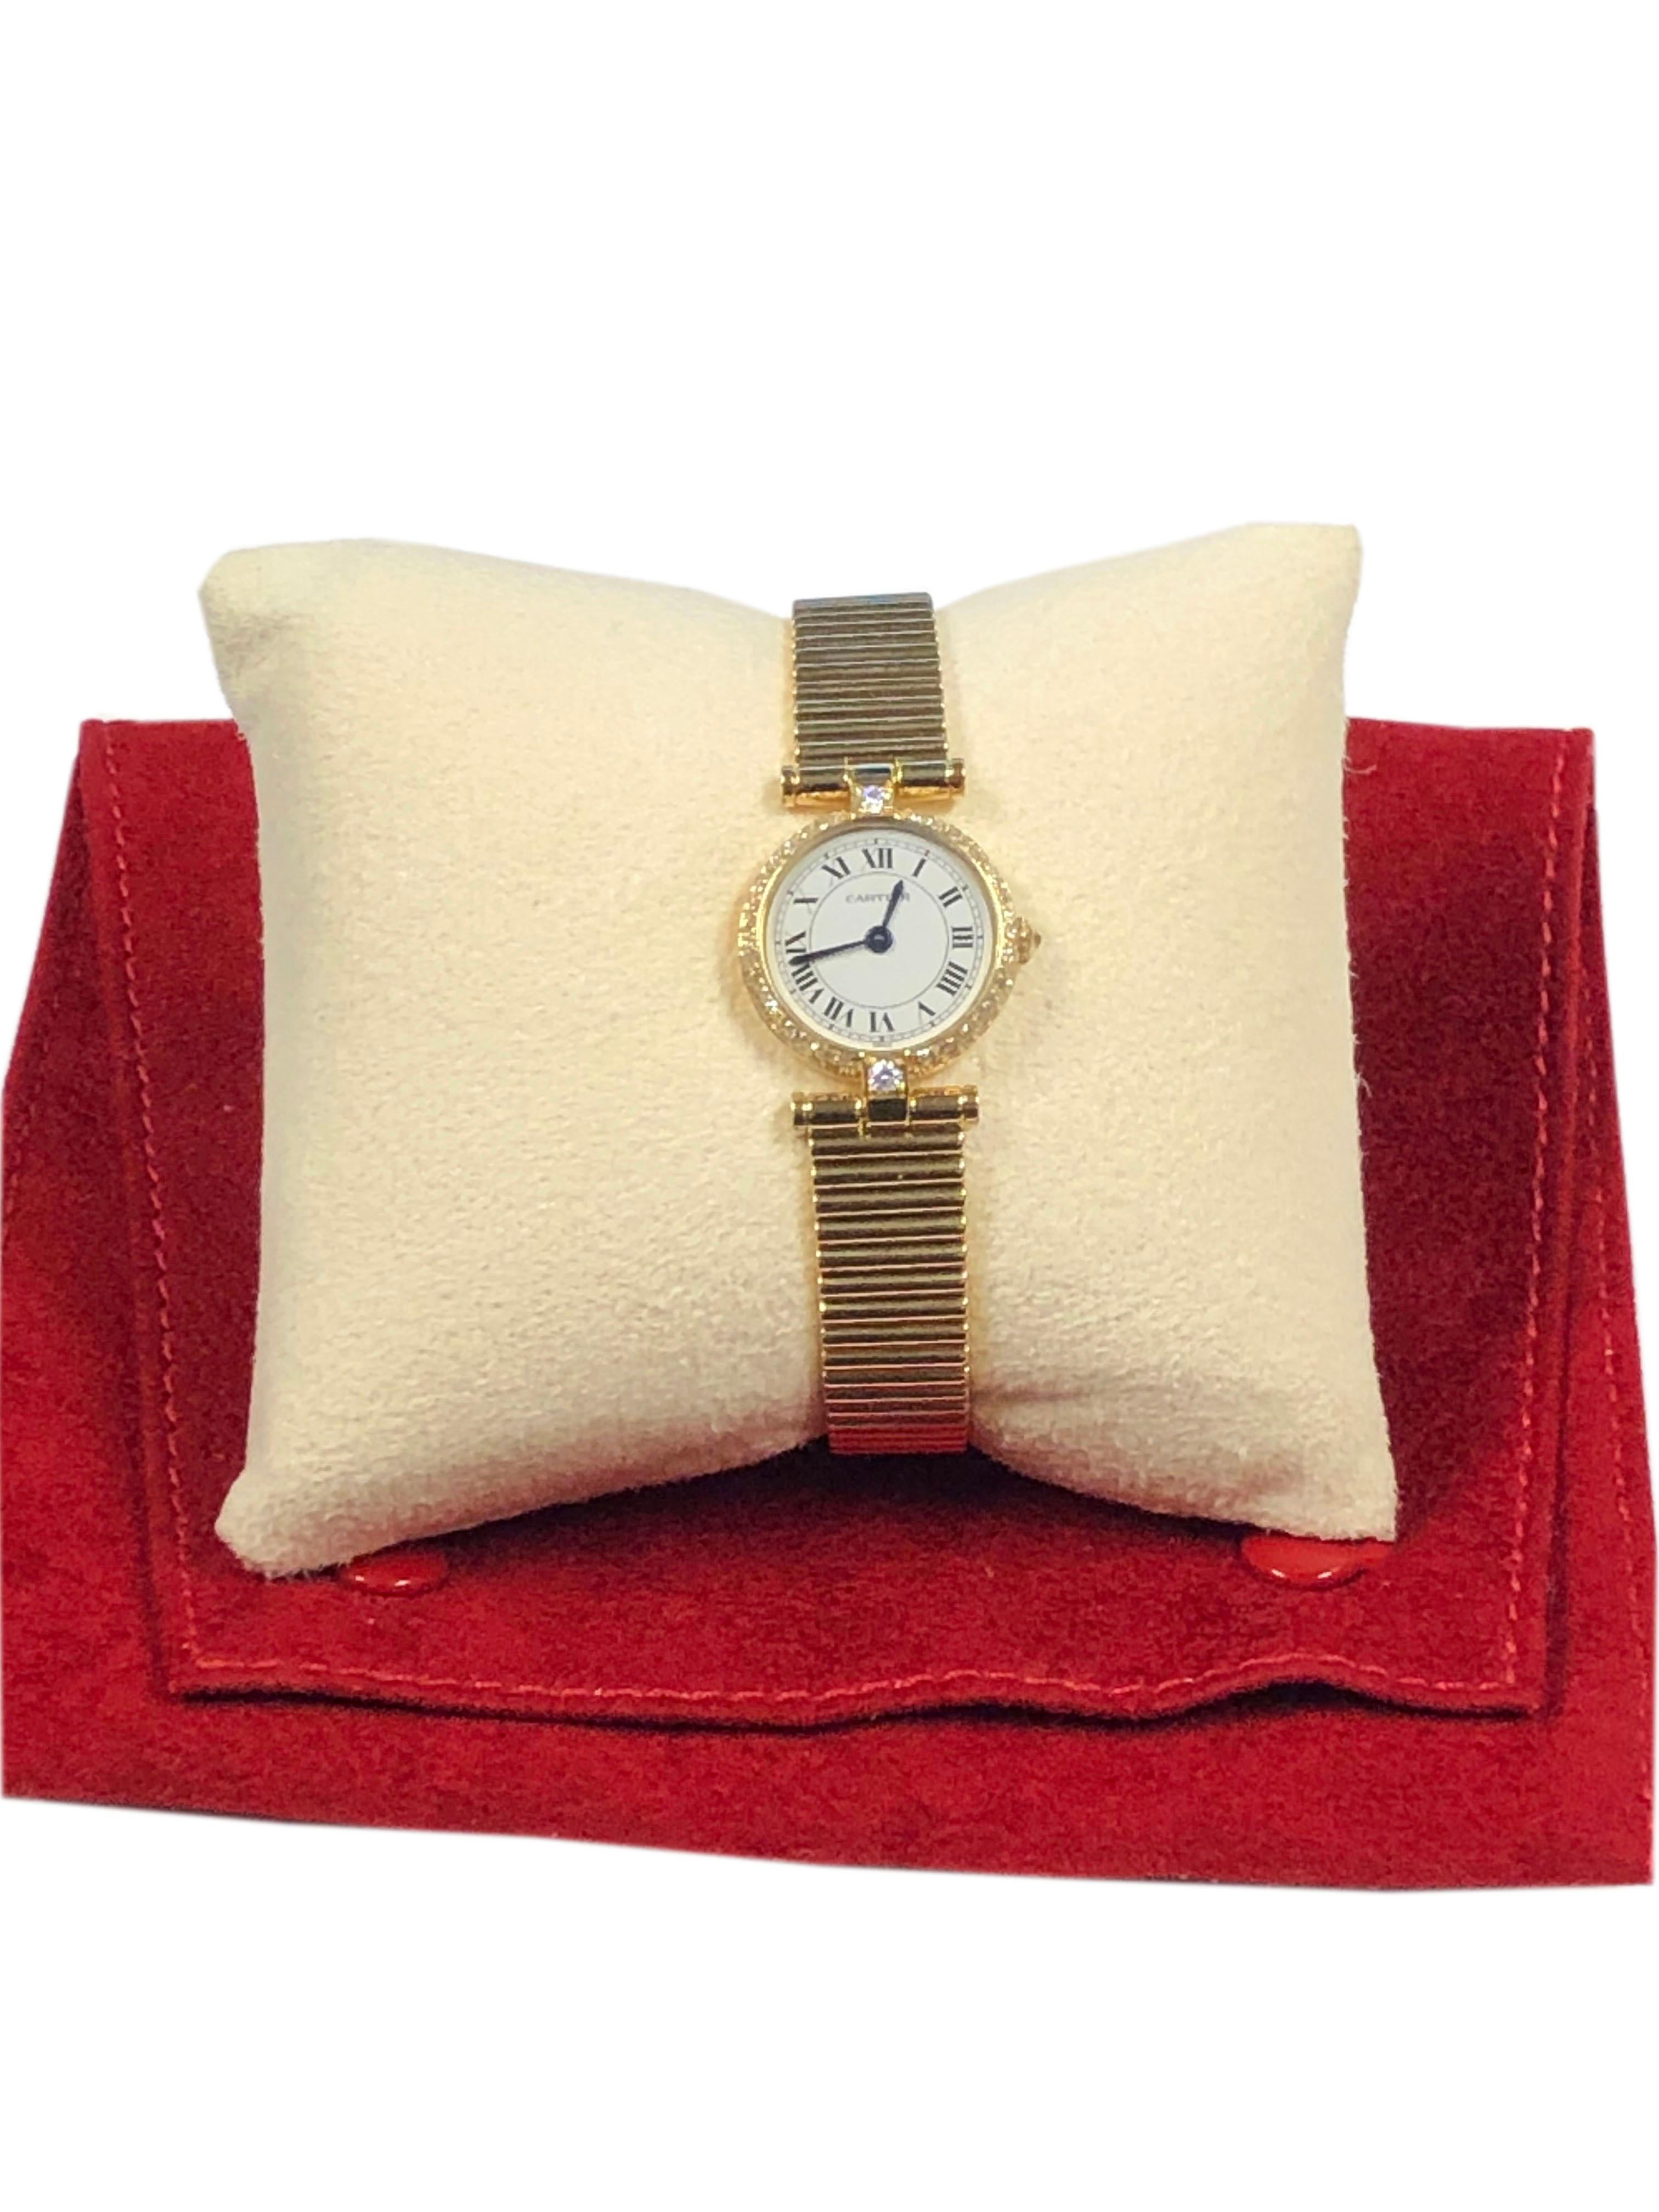 Cartier Vendome Yellow Gold and Diamond Ladies Wrist Watch For Sale 2